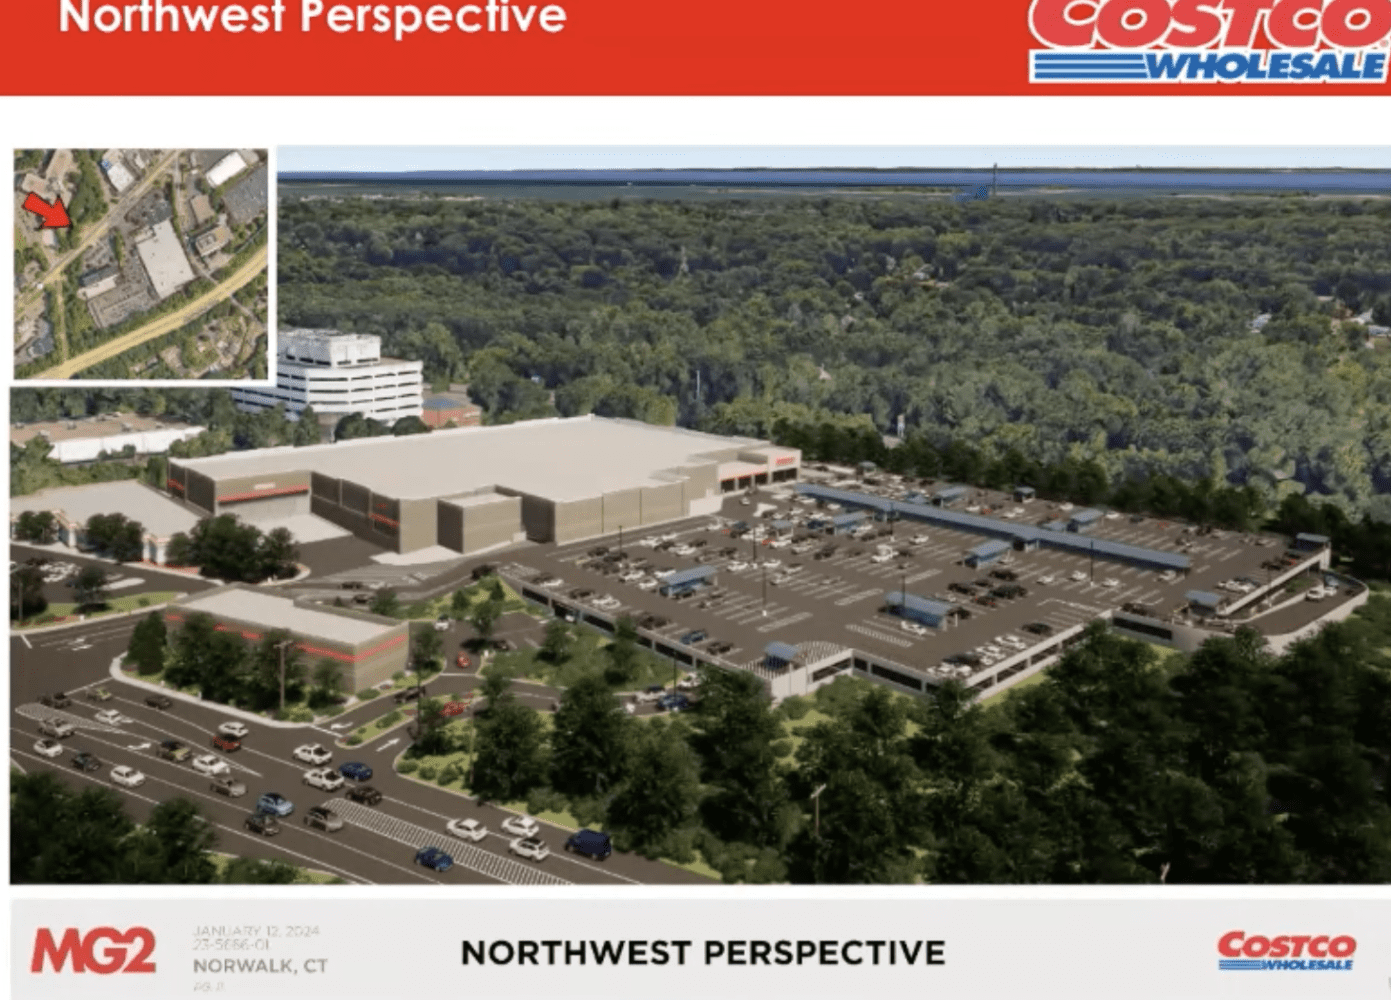 Costco Receives Approval for Redevelopment, but with ‘Objectionable’ Requirements